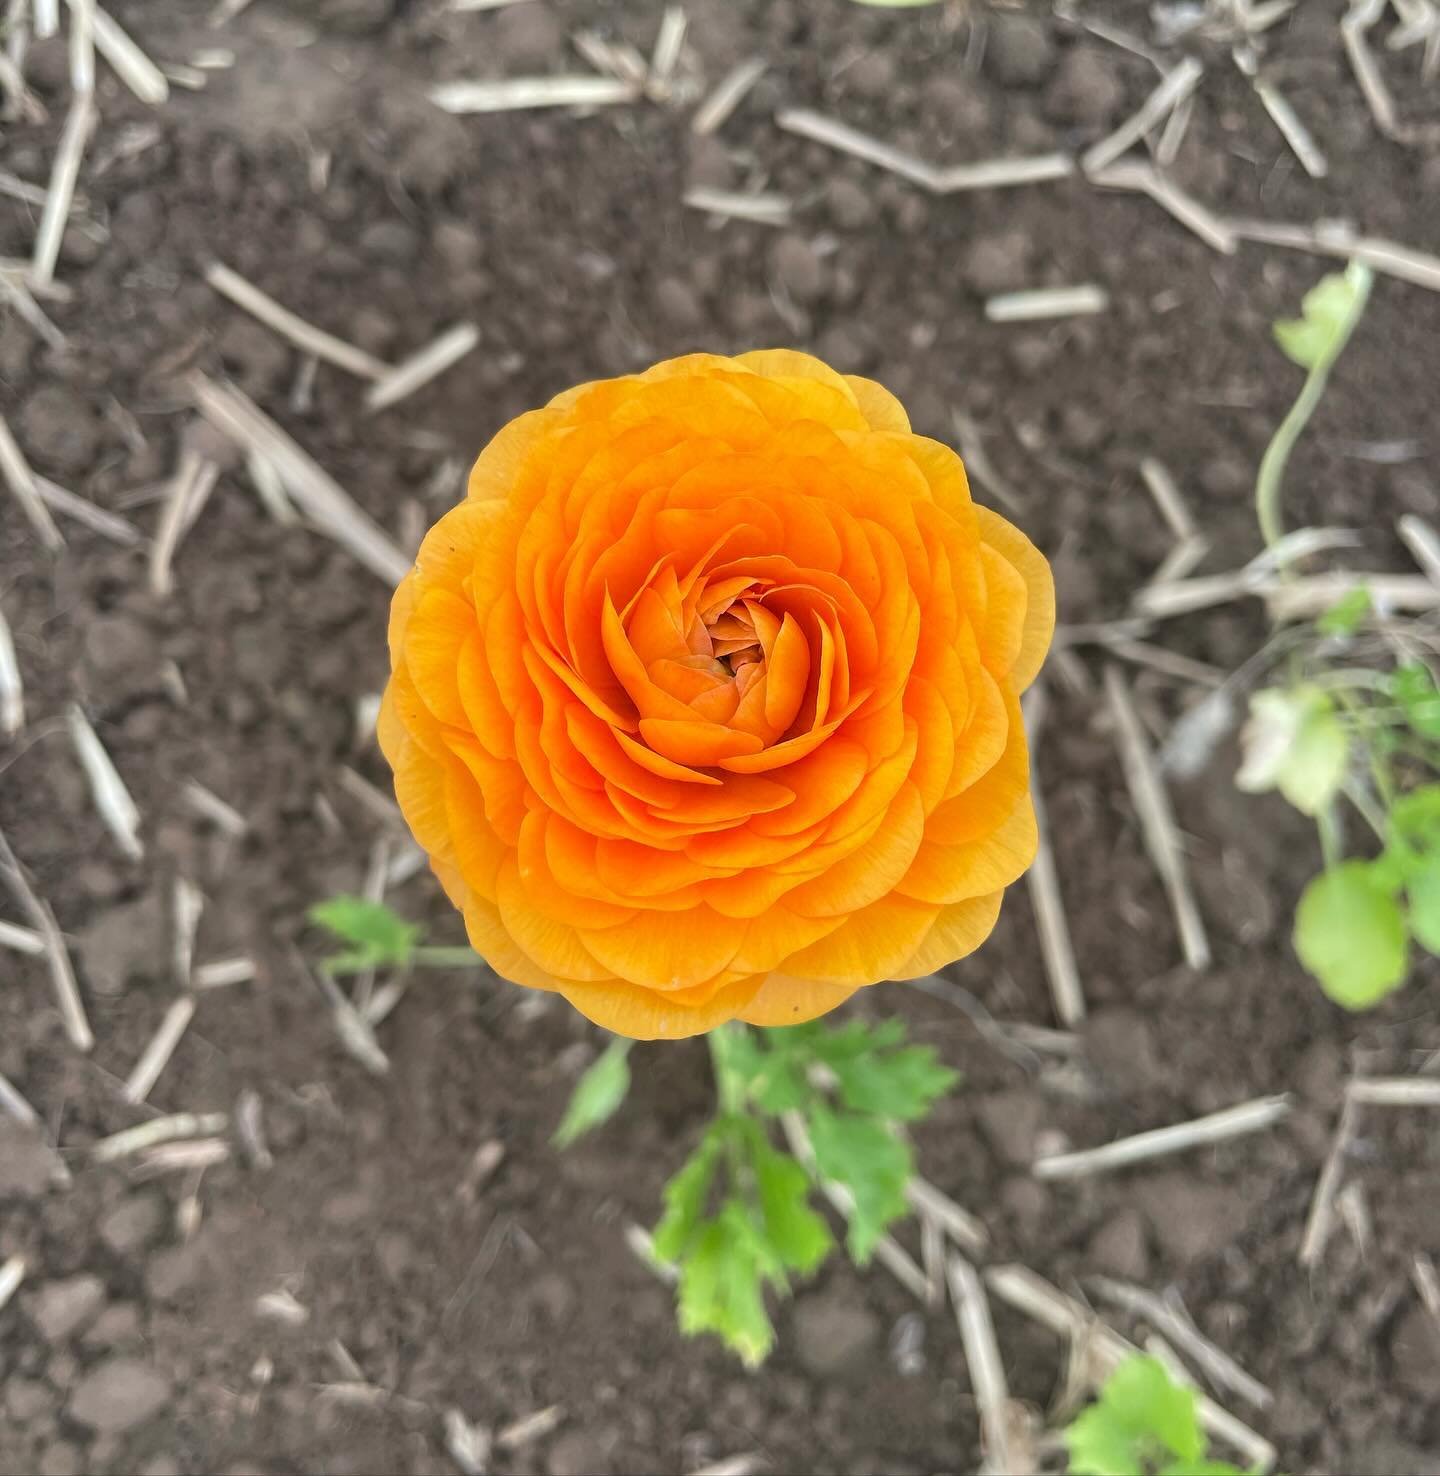 Ridiculous!🧡Oh, I mean Ranunculus. 

😌It&rsquo;s always so gratifying to see the first pop of color in the flower beds!